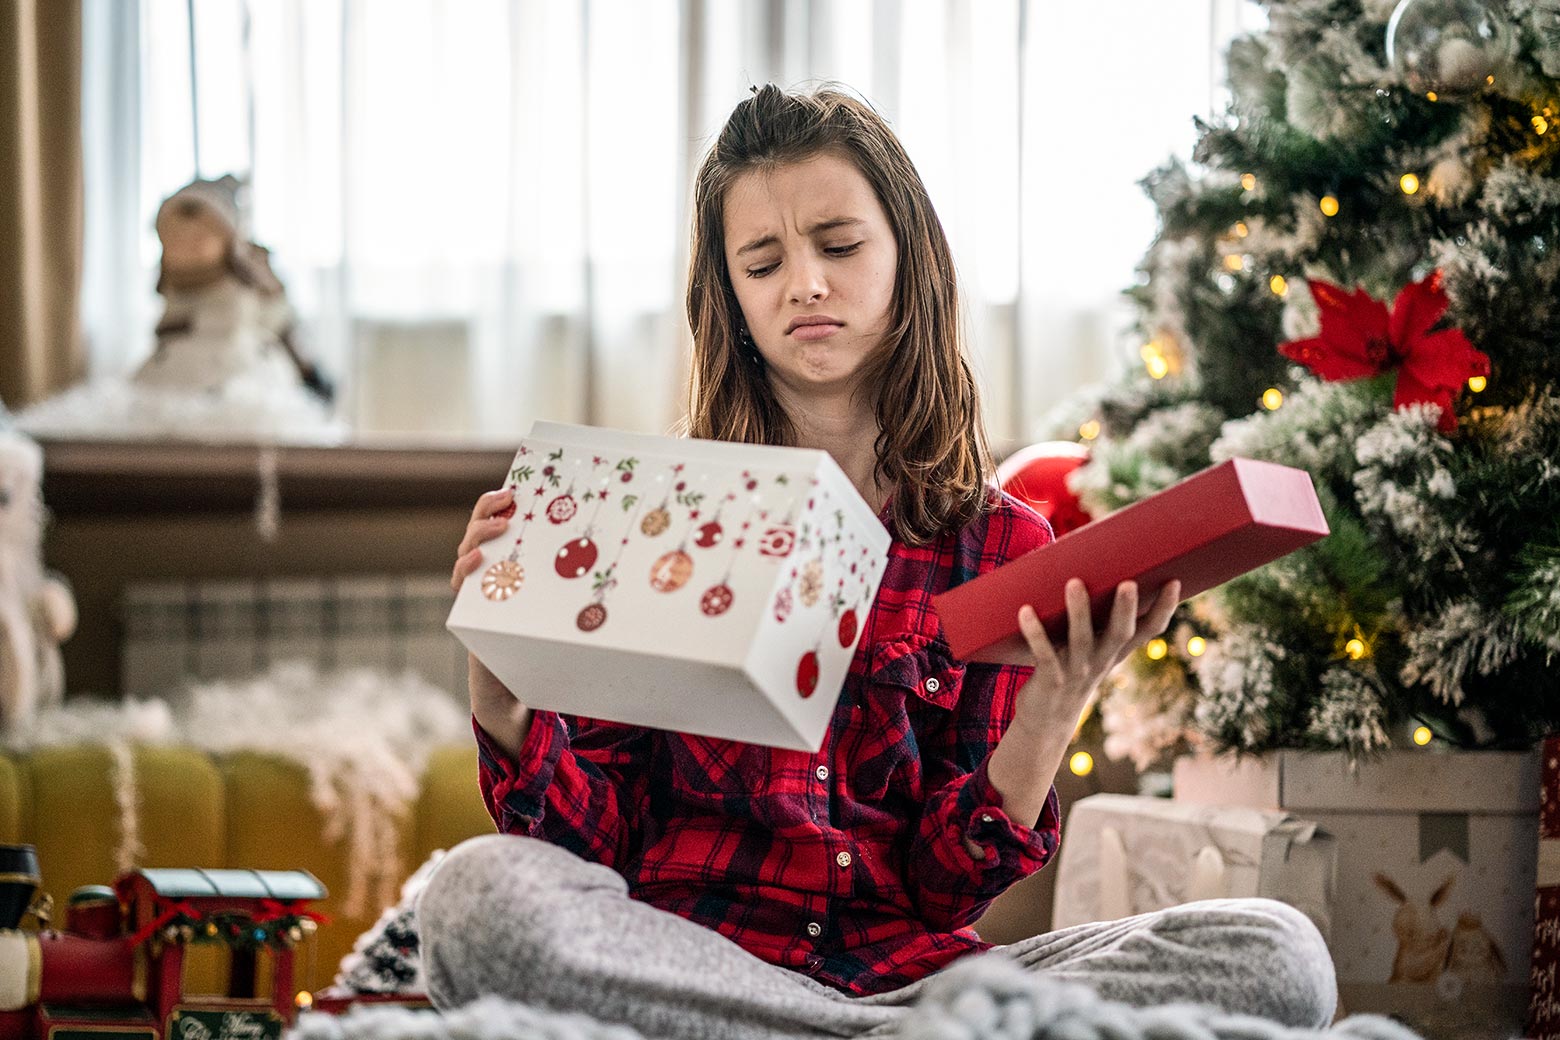 The worst Christmas gifts: A decades-long contest that's brought